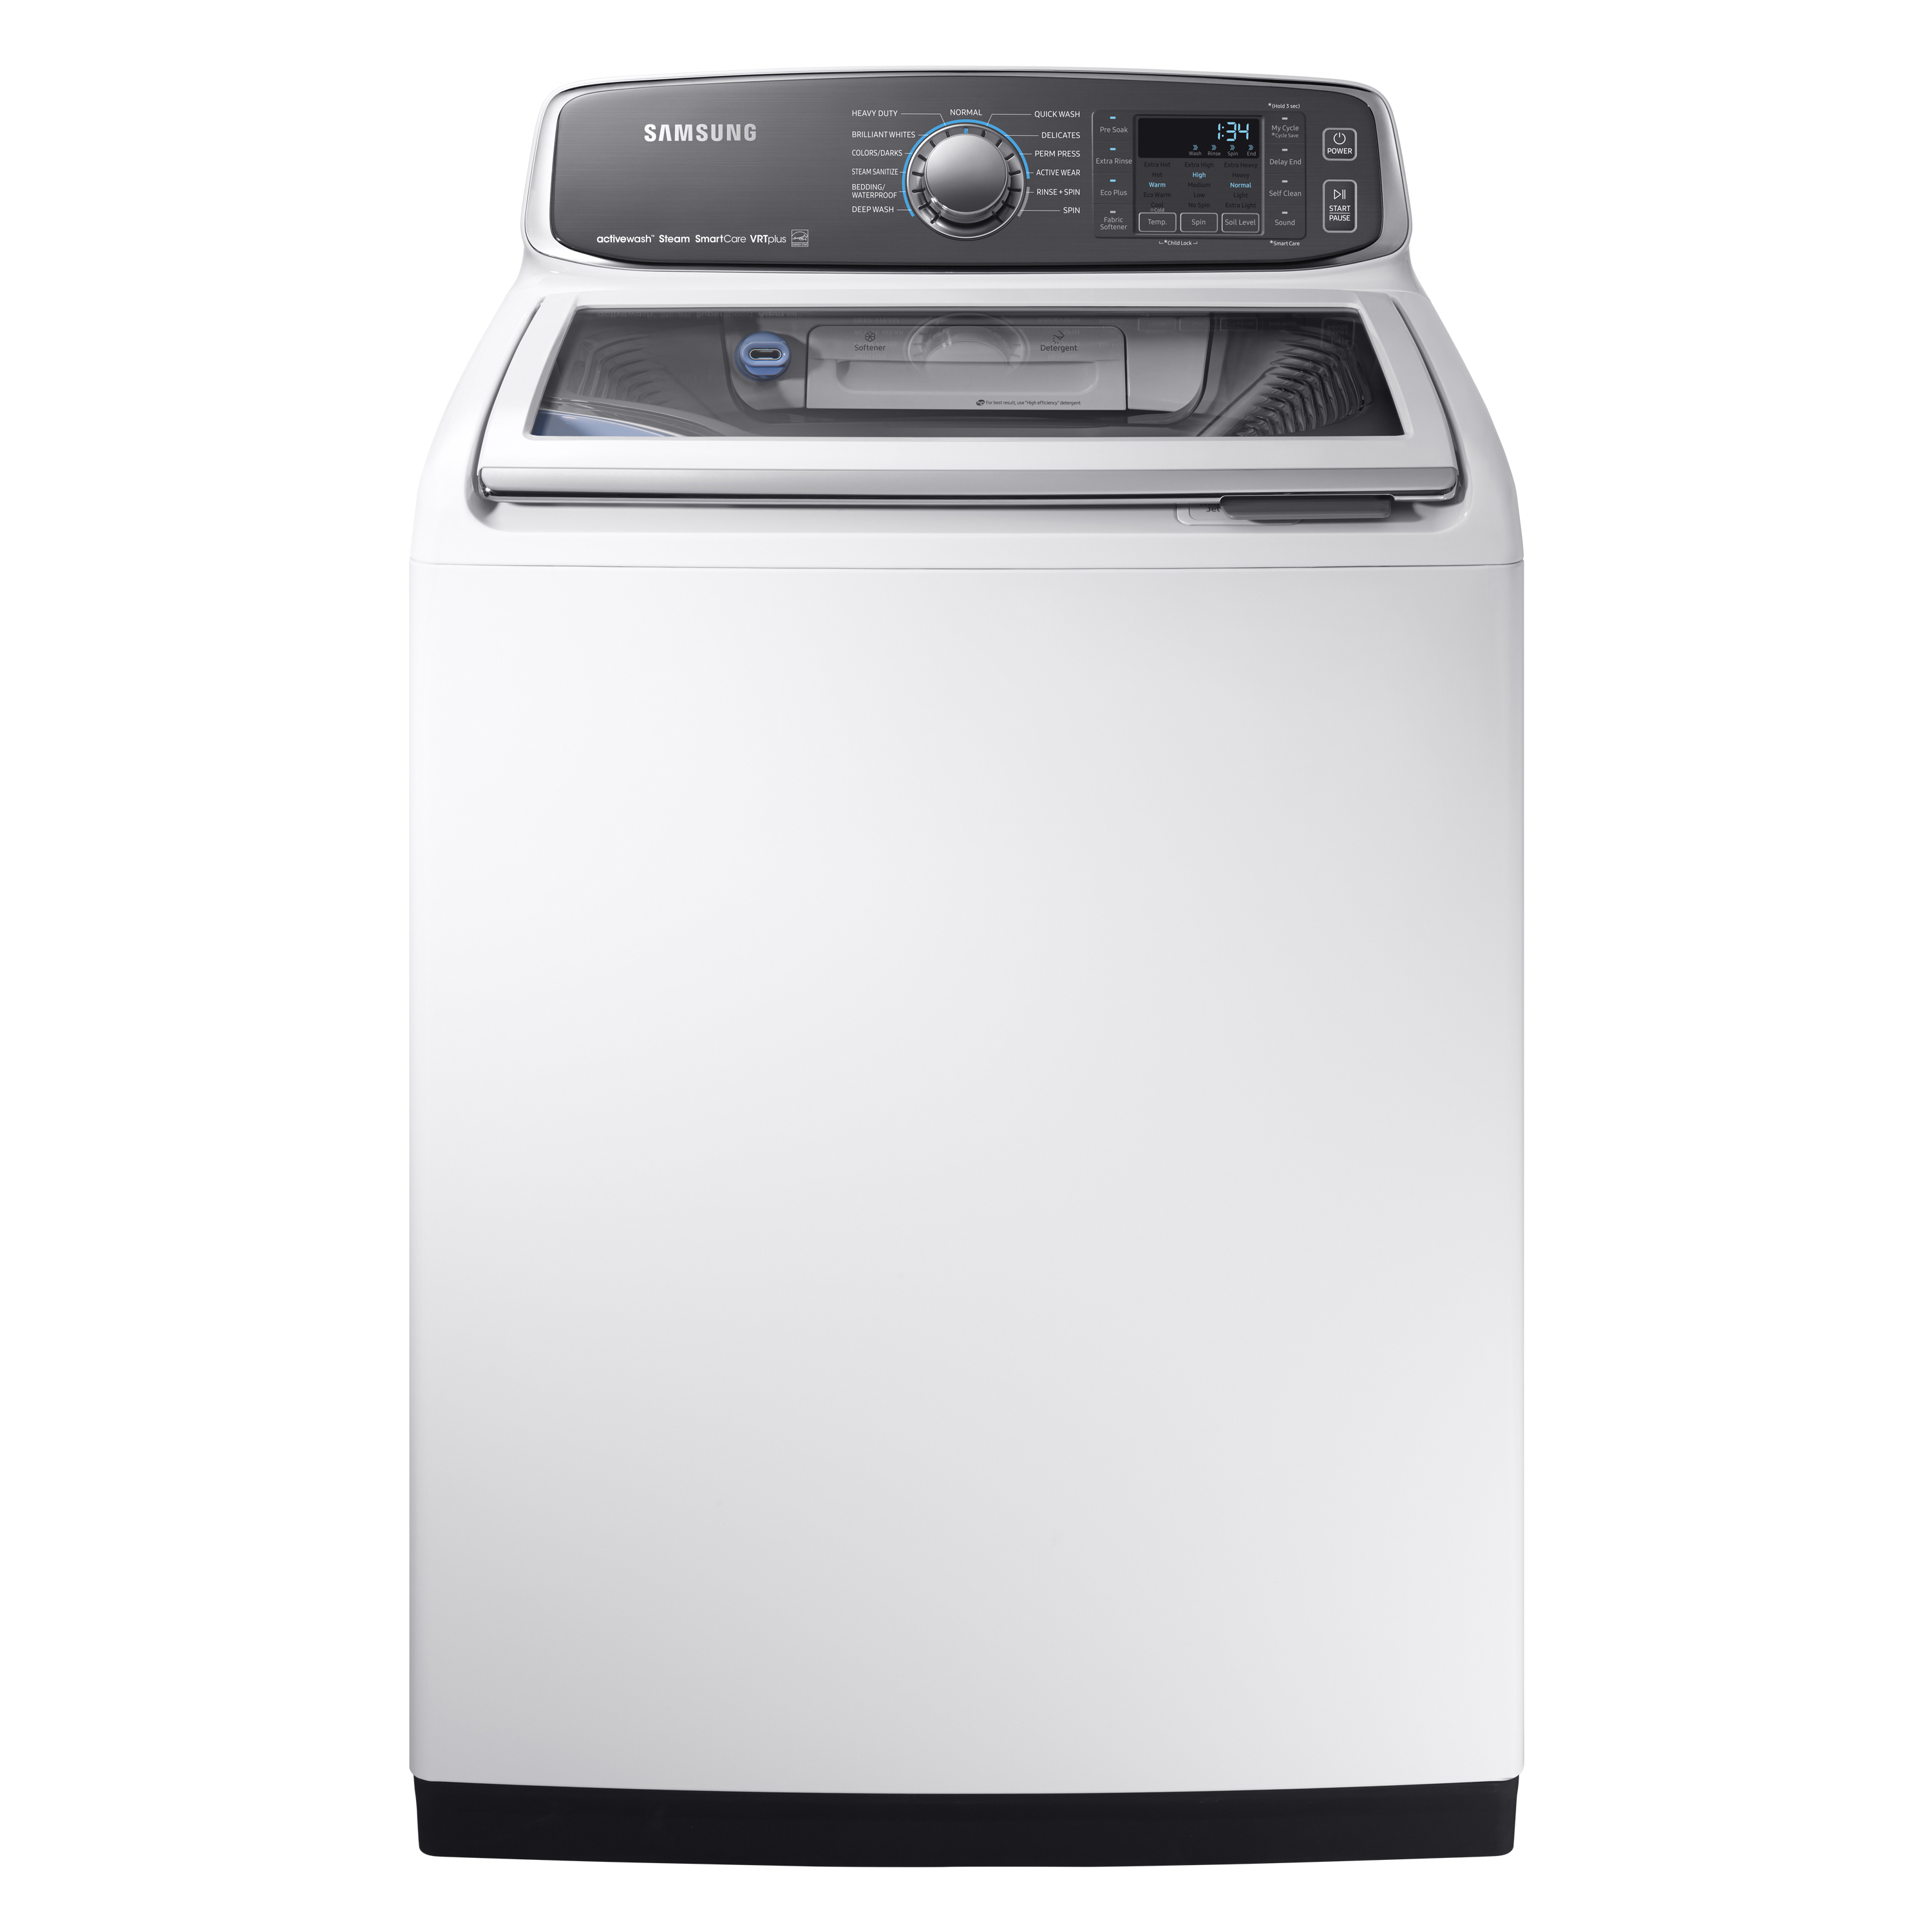 samsung-4-4-cu-ft-high-efficiency-agitator-top-load-washer-white-in